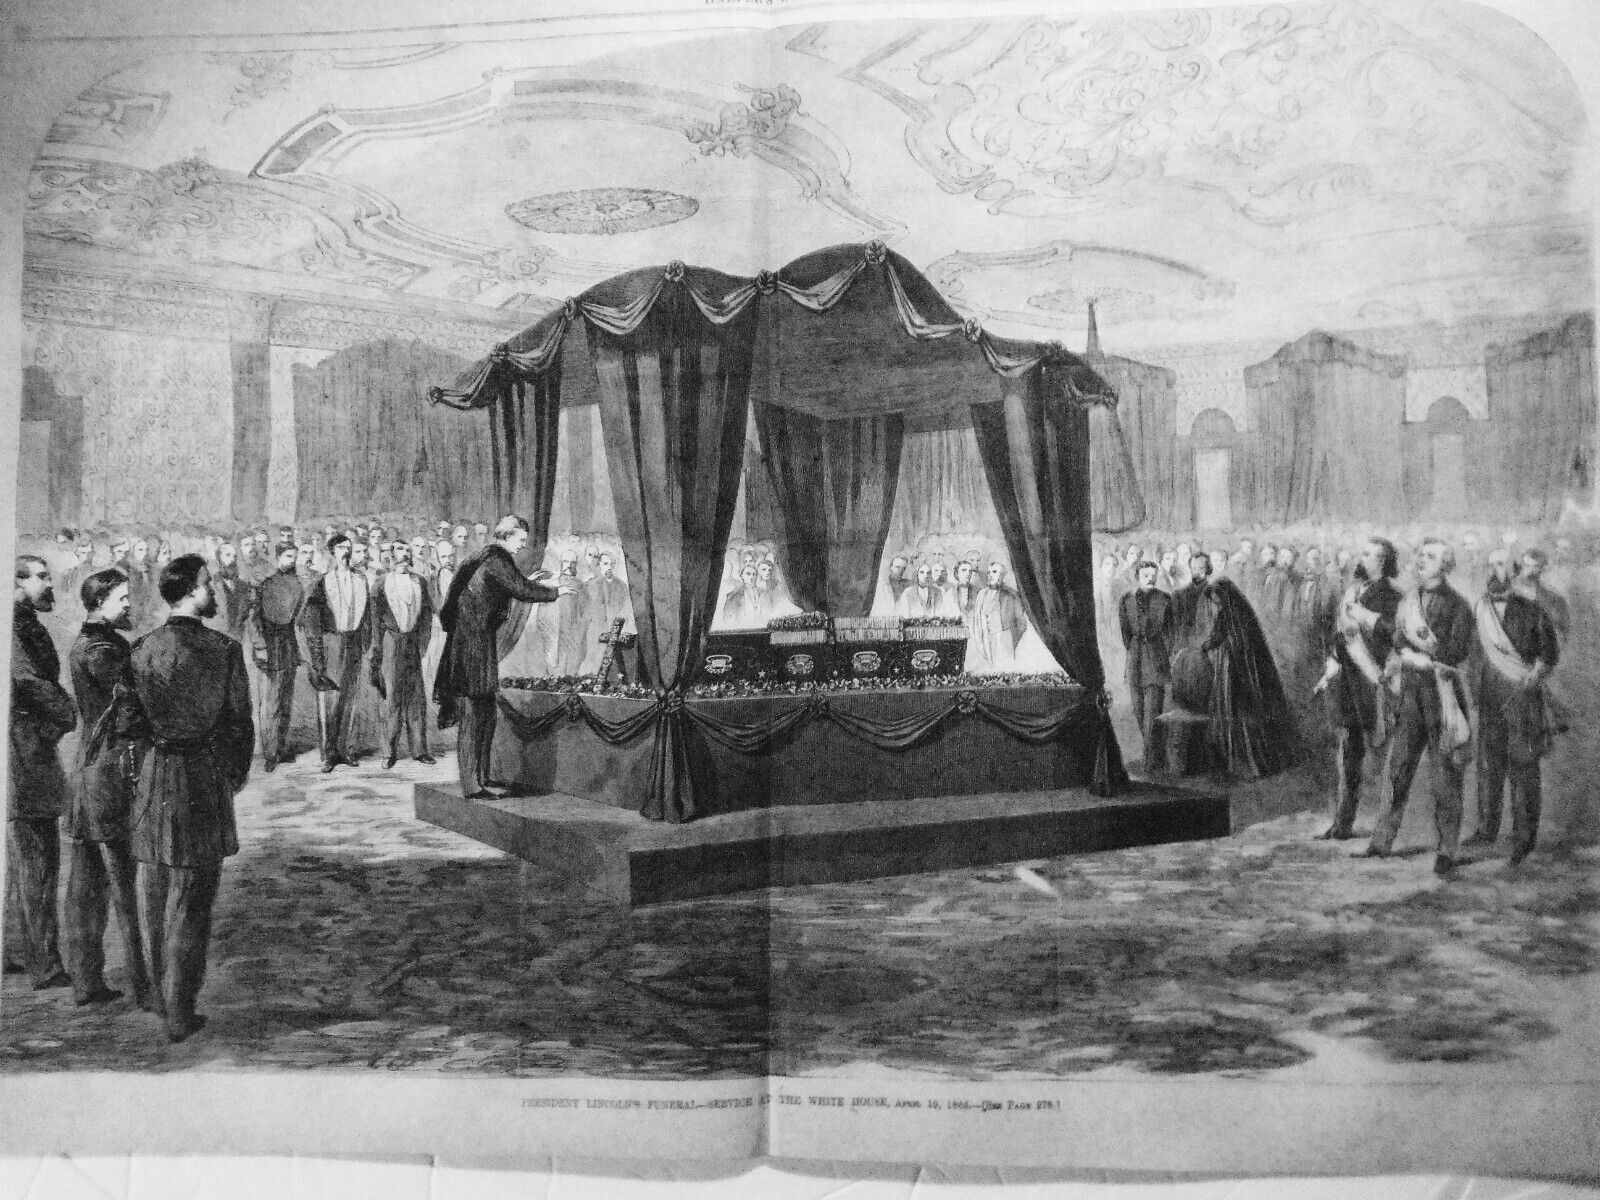 President Lincoln's Funeral, Service at White House Harper's Weekly, May 6, 1865